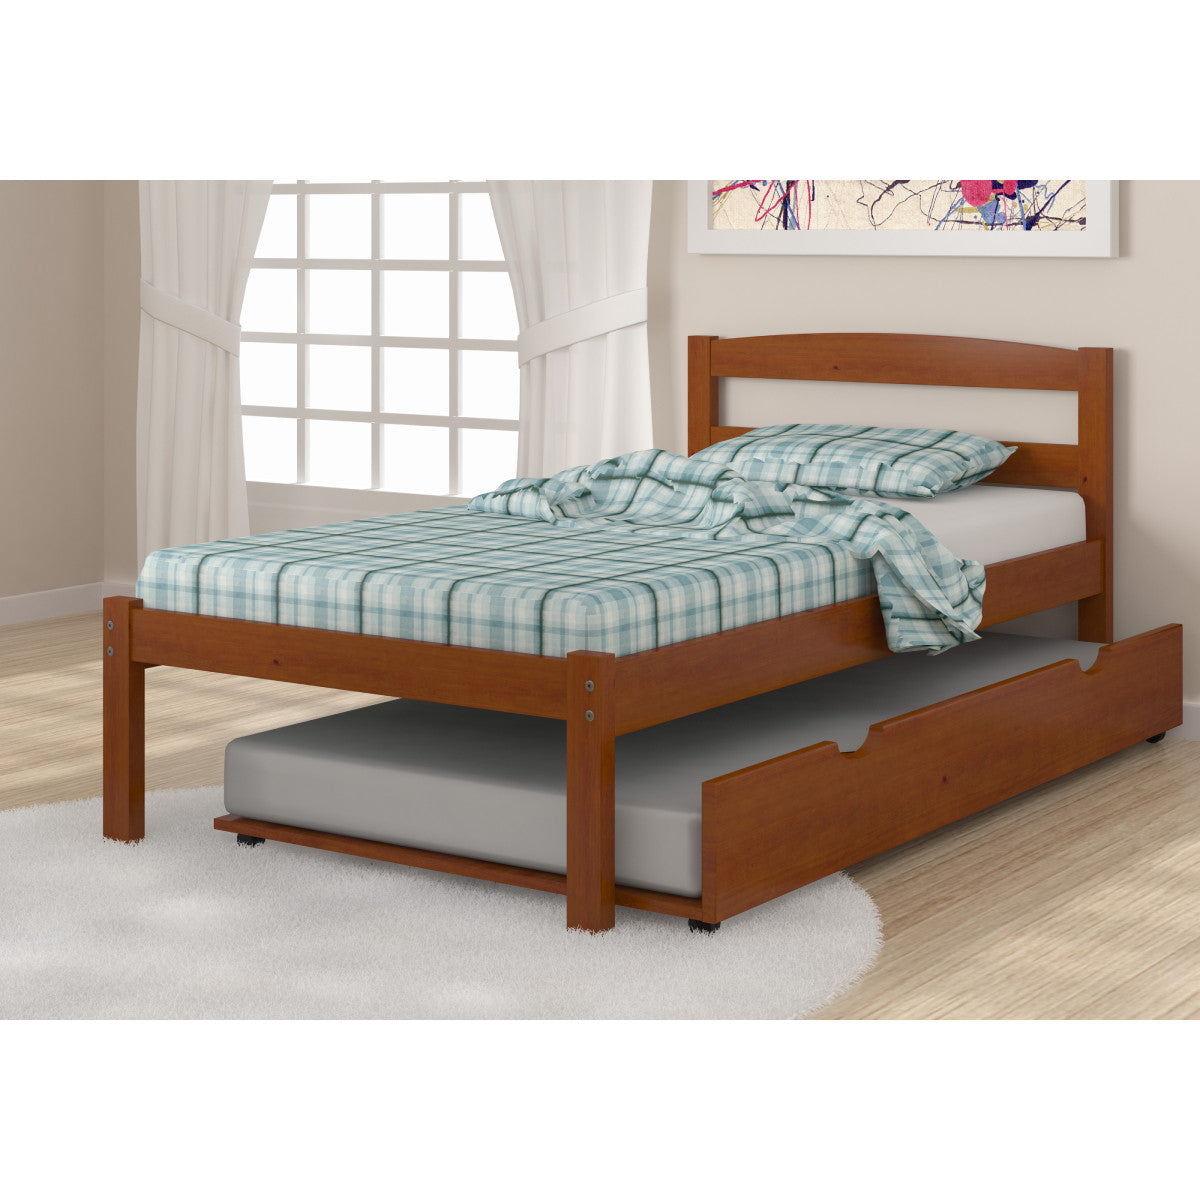 TWIN ECONO BED WITH TRUNDLE BED LIGHT ESPRESSO